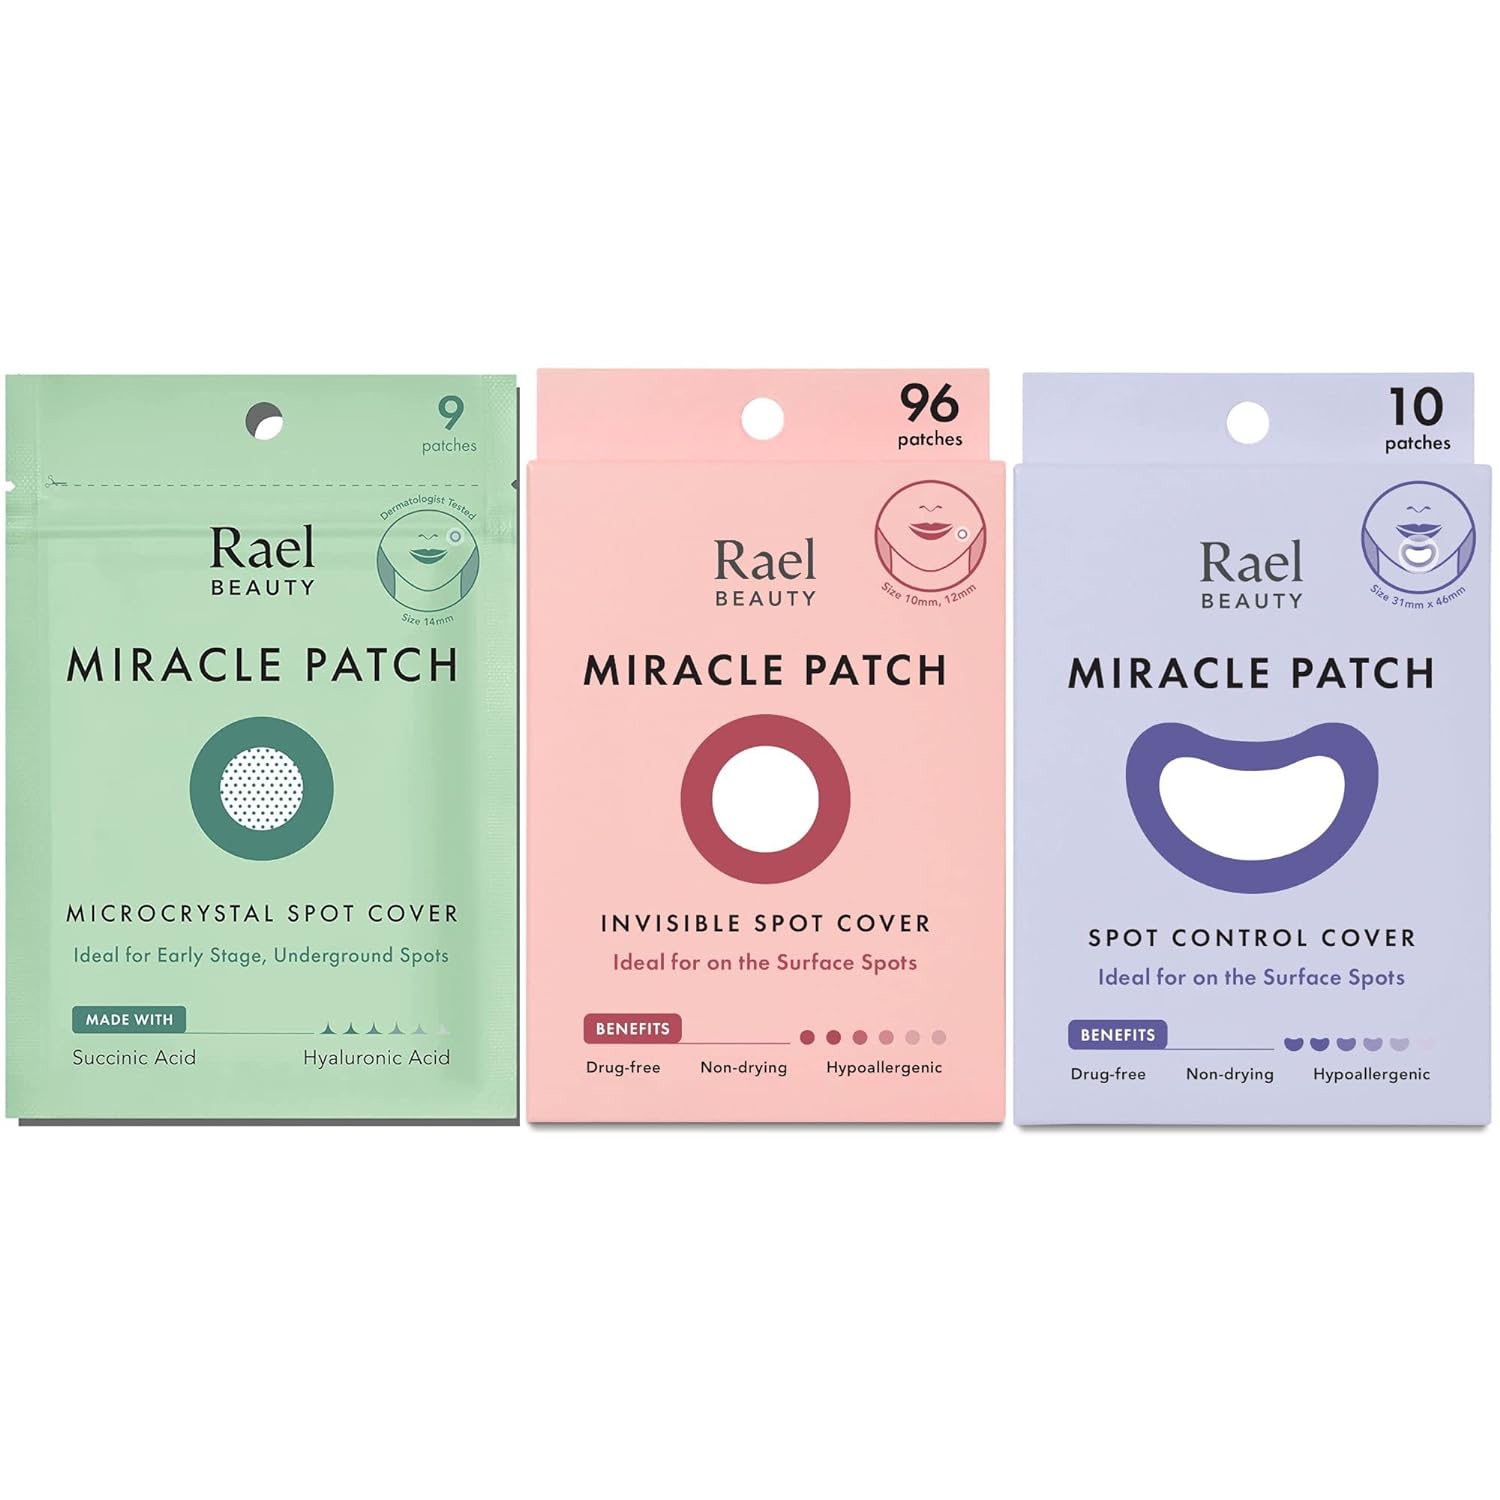 Rael Miracle Bundle - Microcrystal Spot Cover (9 Count), Invisible Spot Cover (96 Count), Spot Control Cover (10 Count)